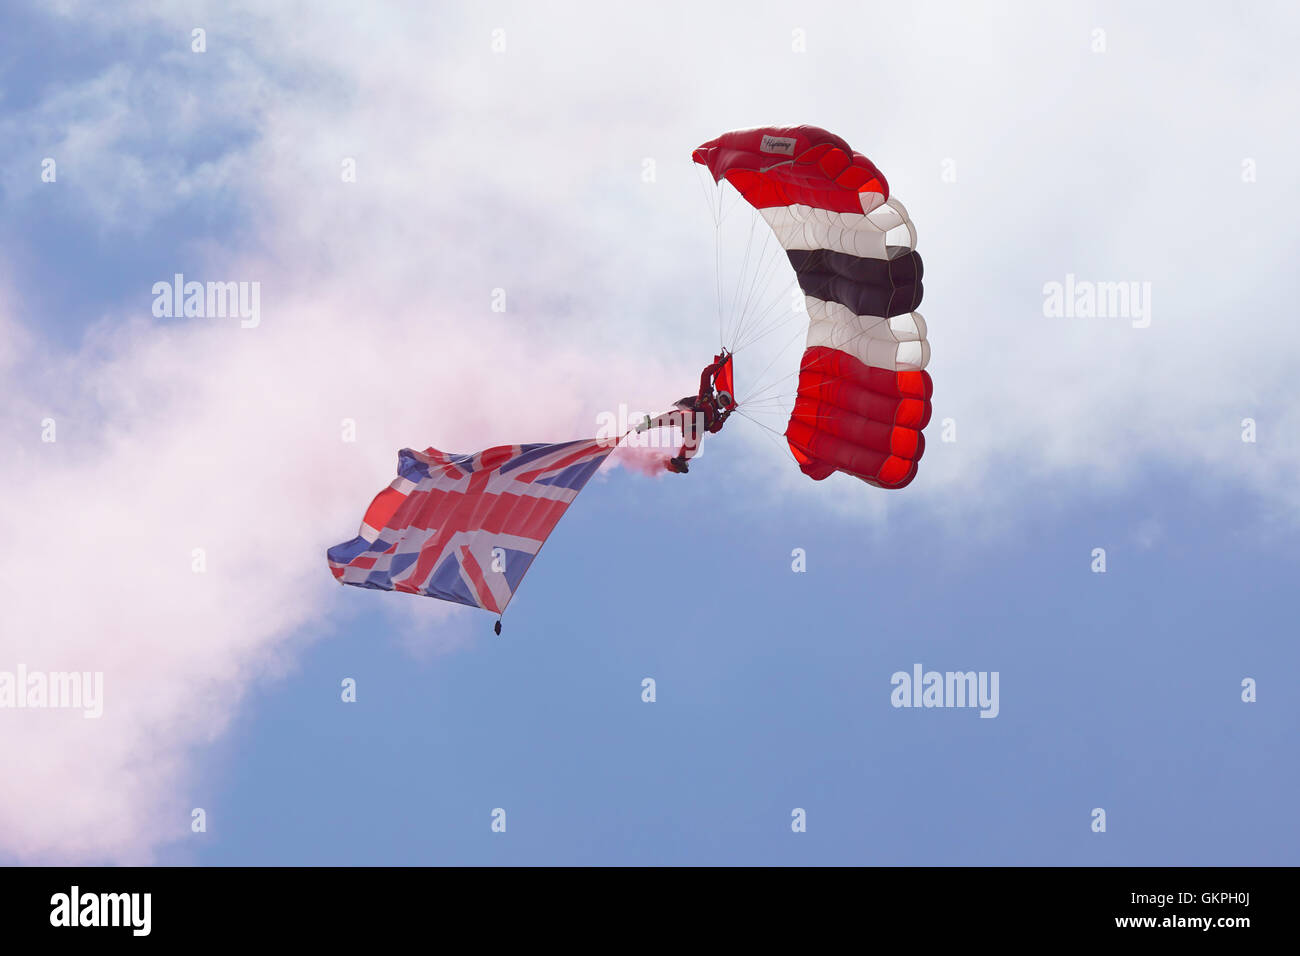 A member of The Parachute Regiment's elite Red Devils display team descends with a Union flag during a demonstration Stock Photo